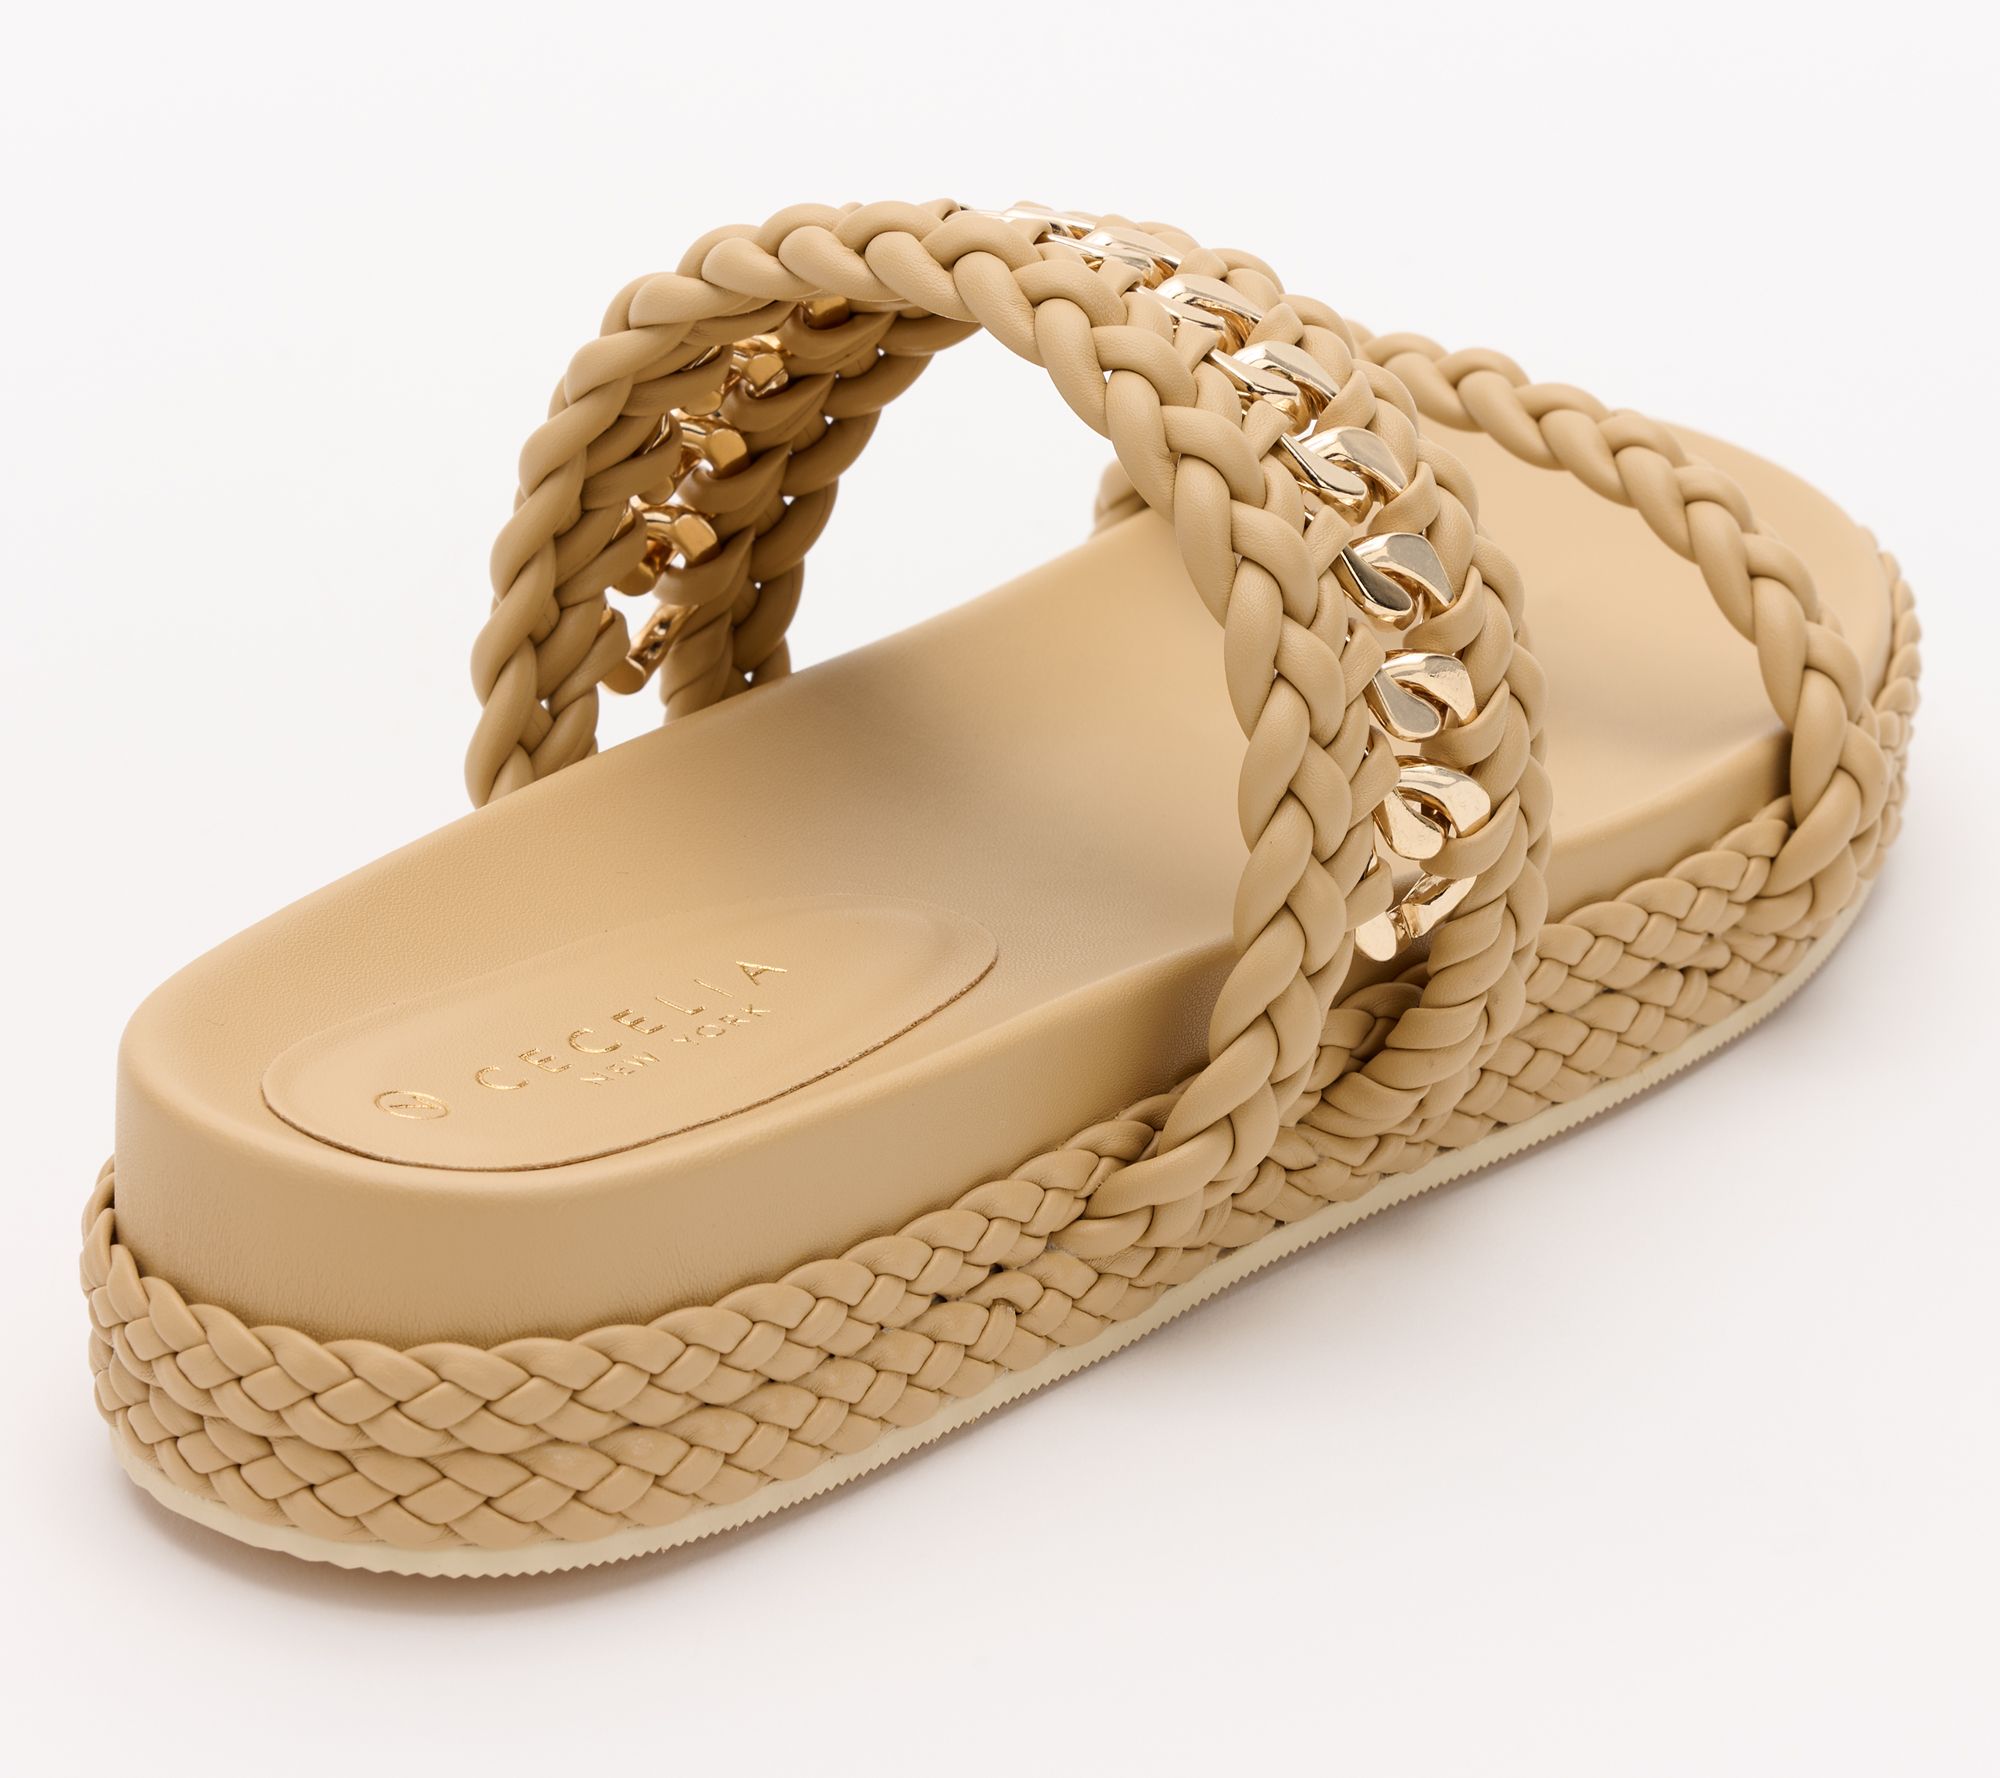 Cecelia New York Leather Woven Sandals - Penny - QVC.com